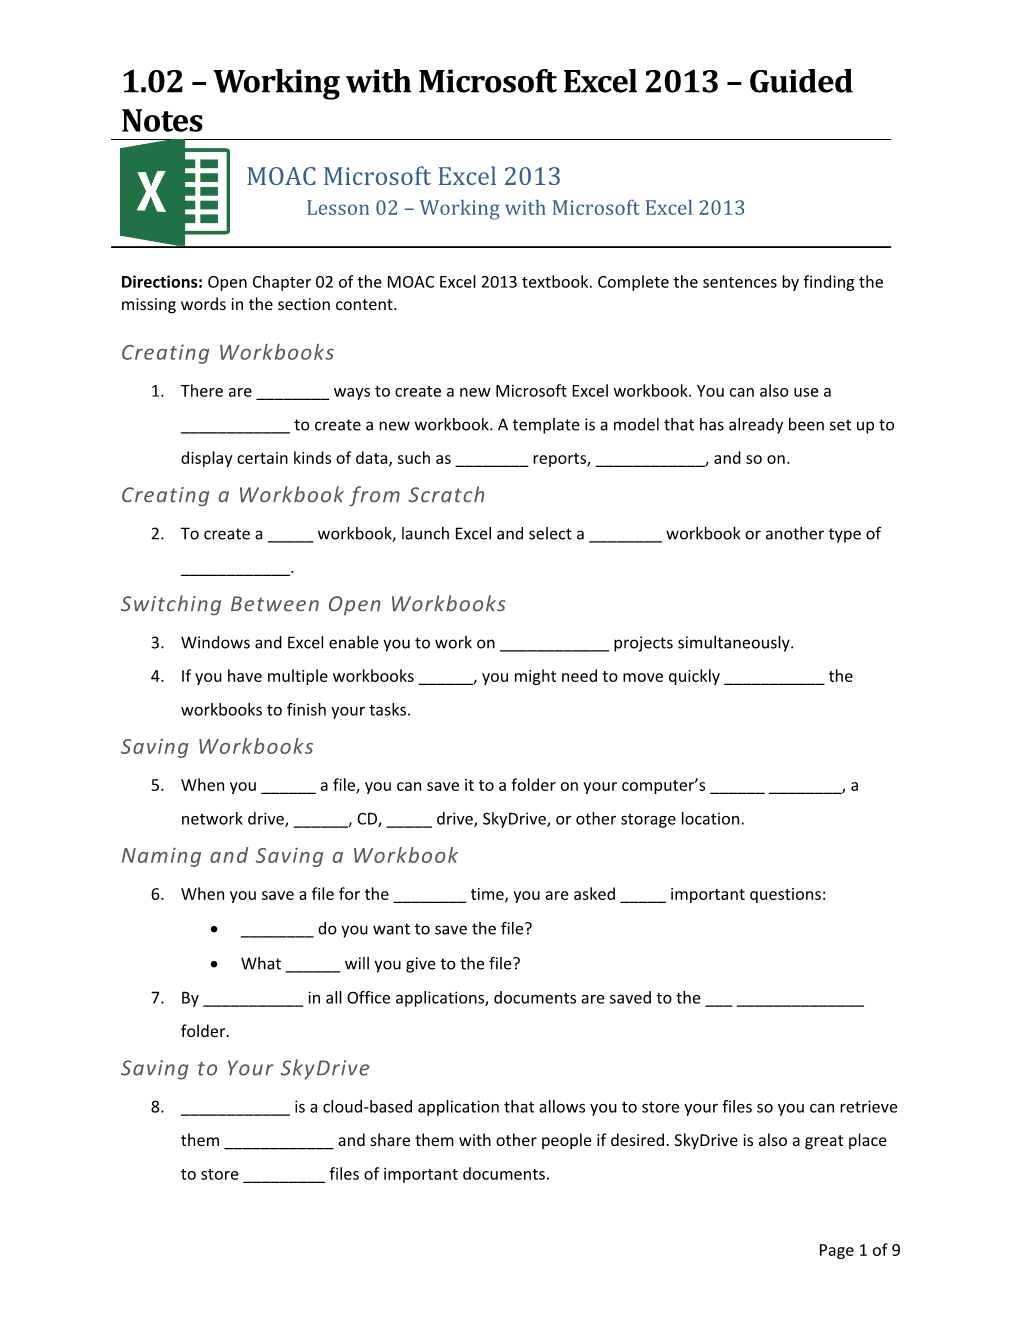 1.02 Working with Microsoft Excel 2013 Guidednotes